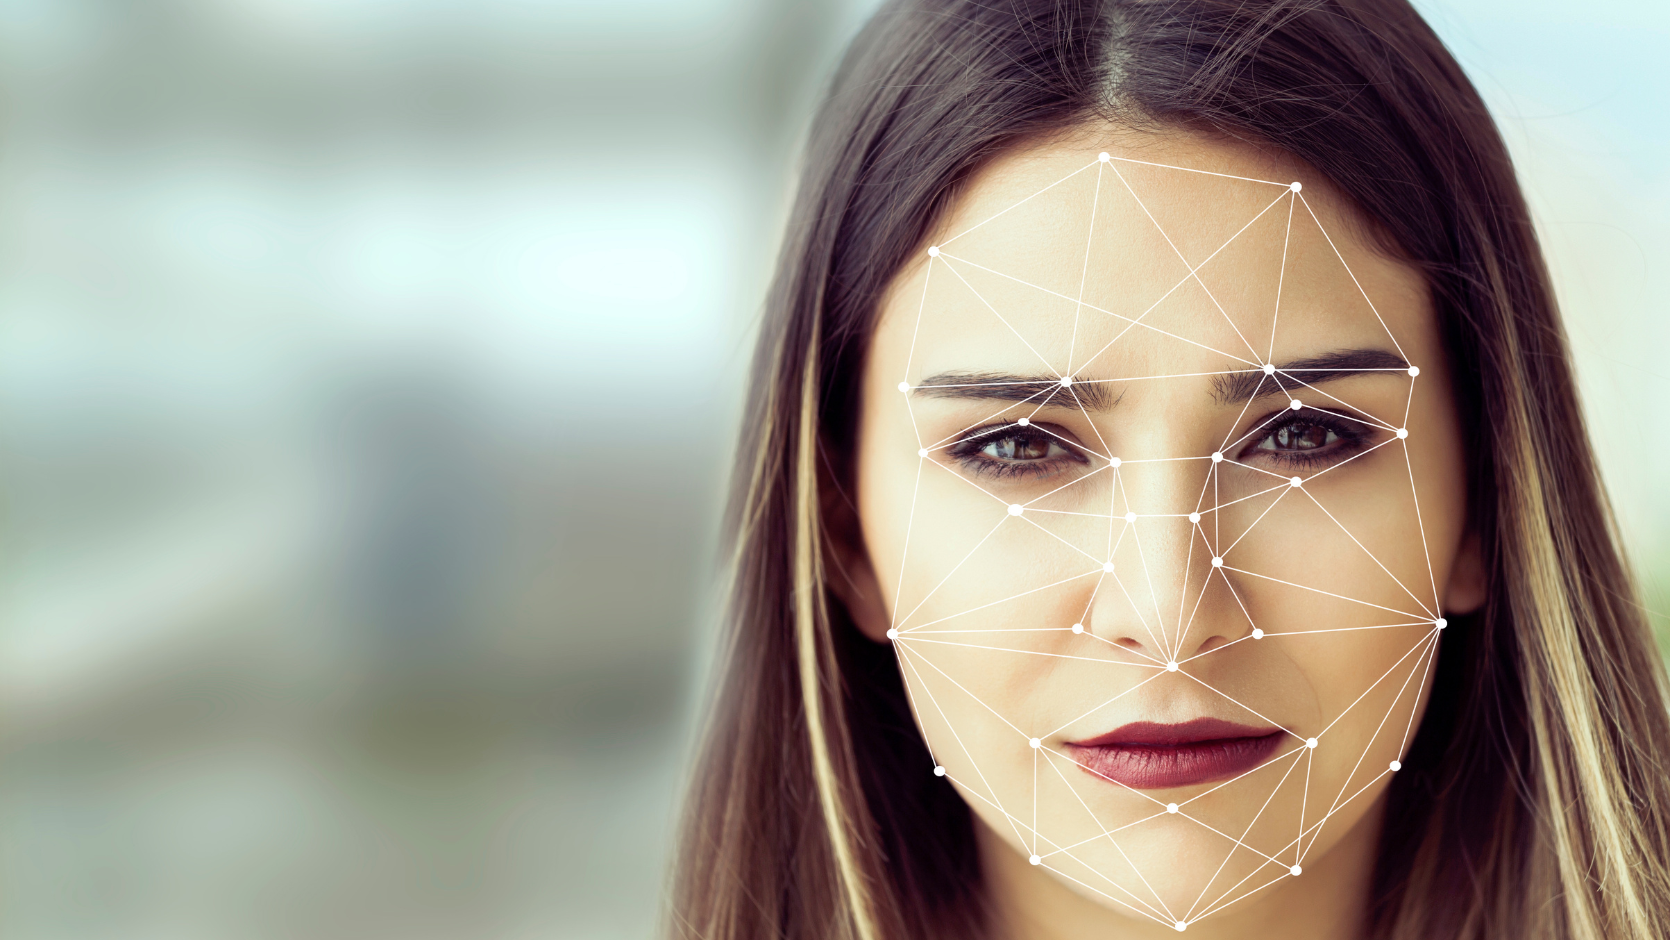 Clear laws needed for use of facial recognition technology